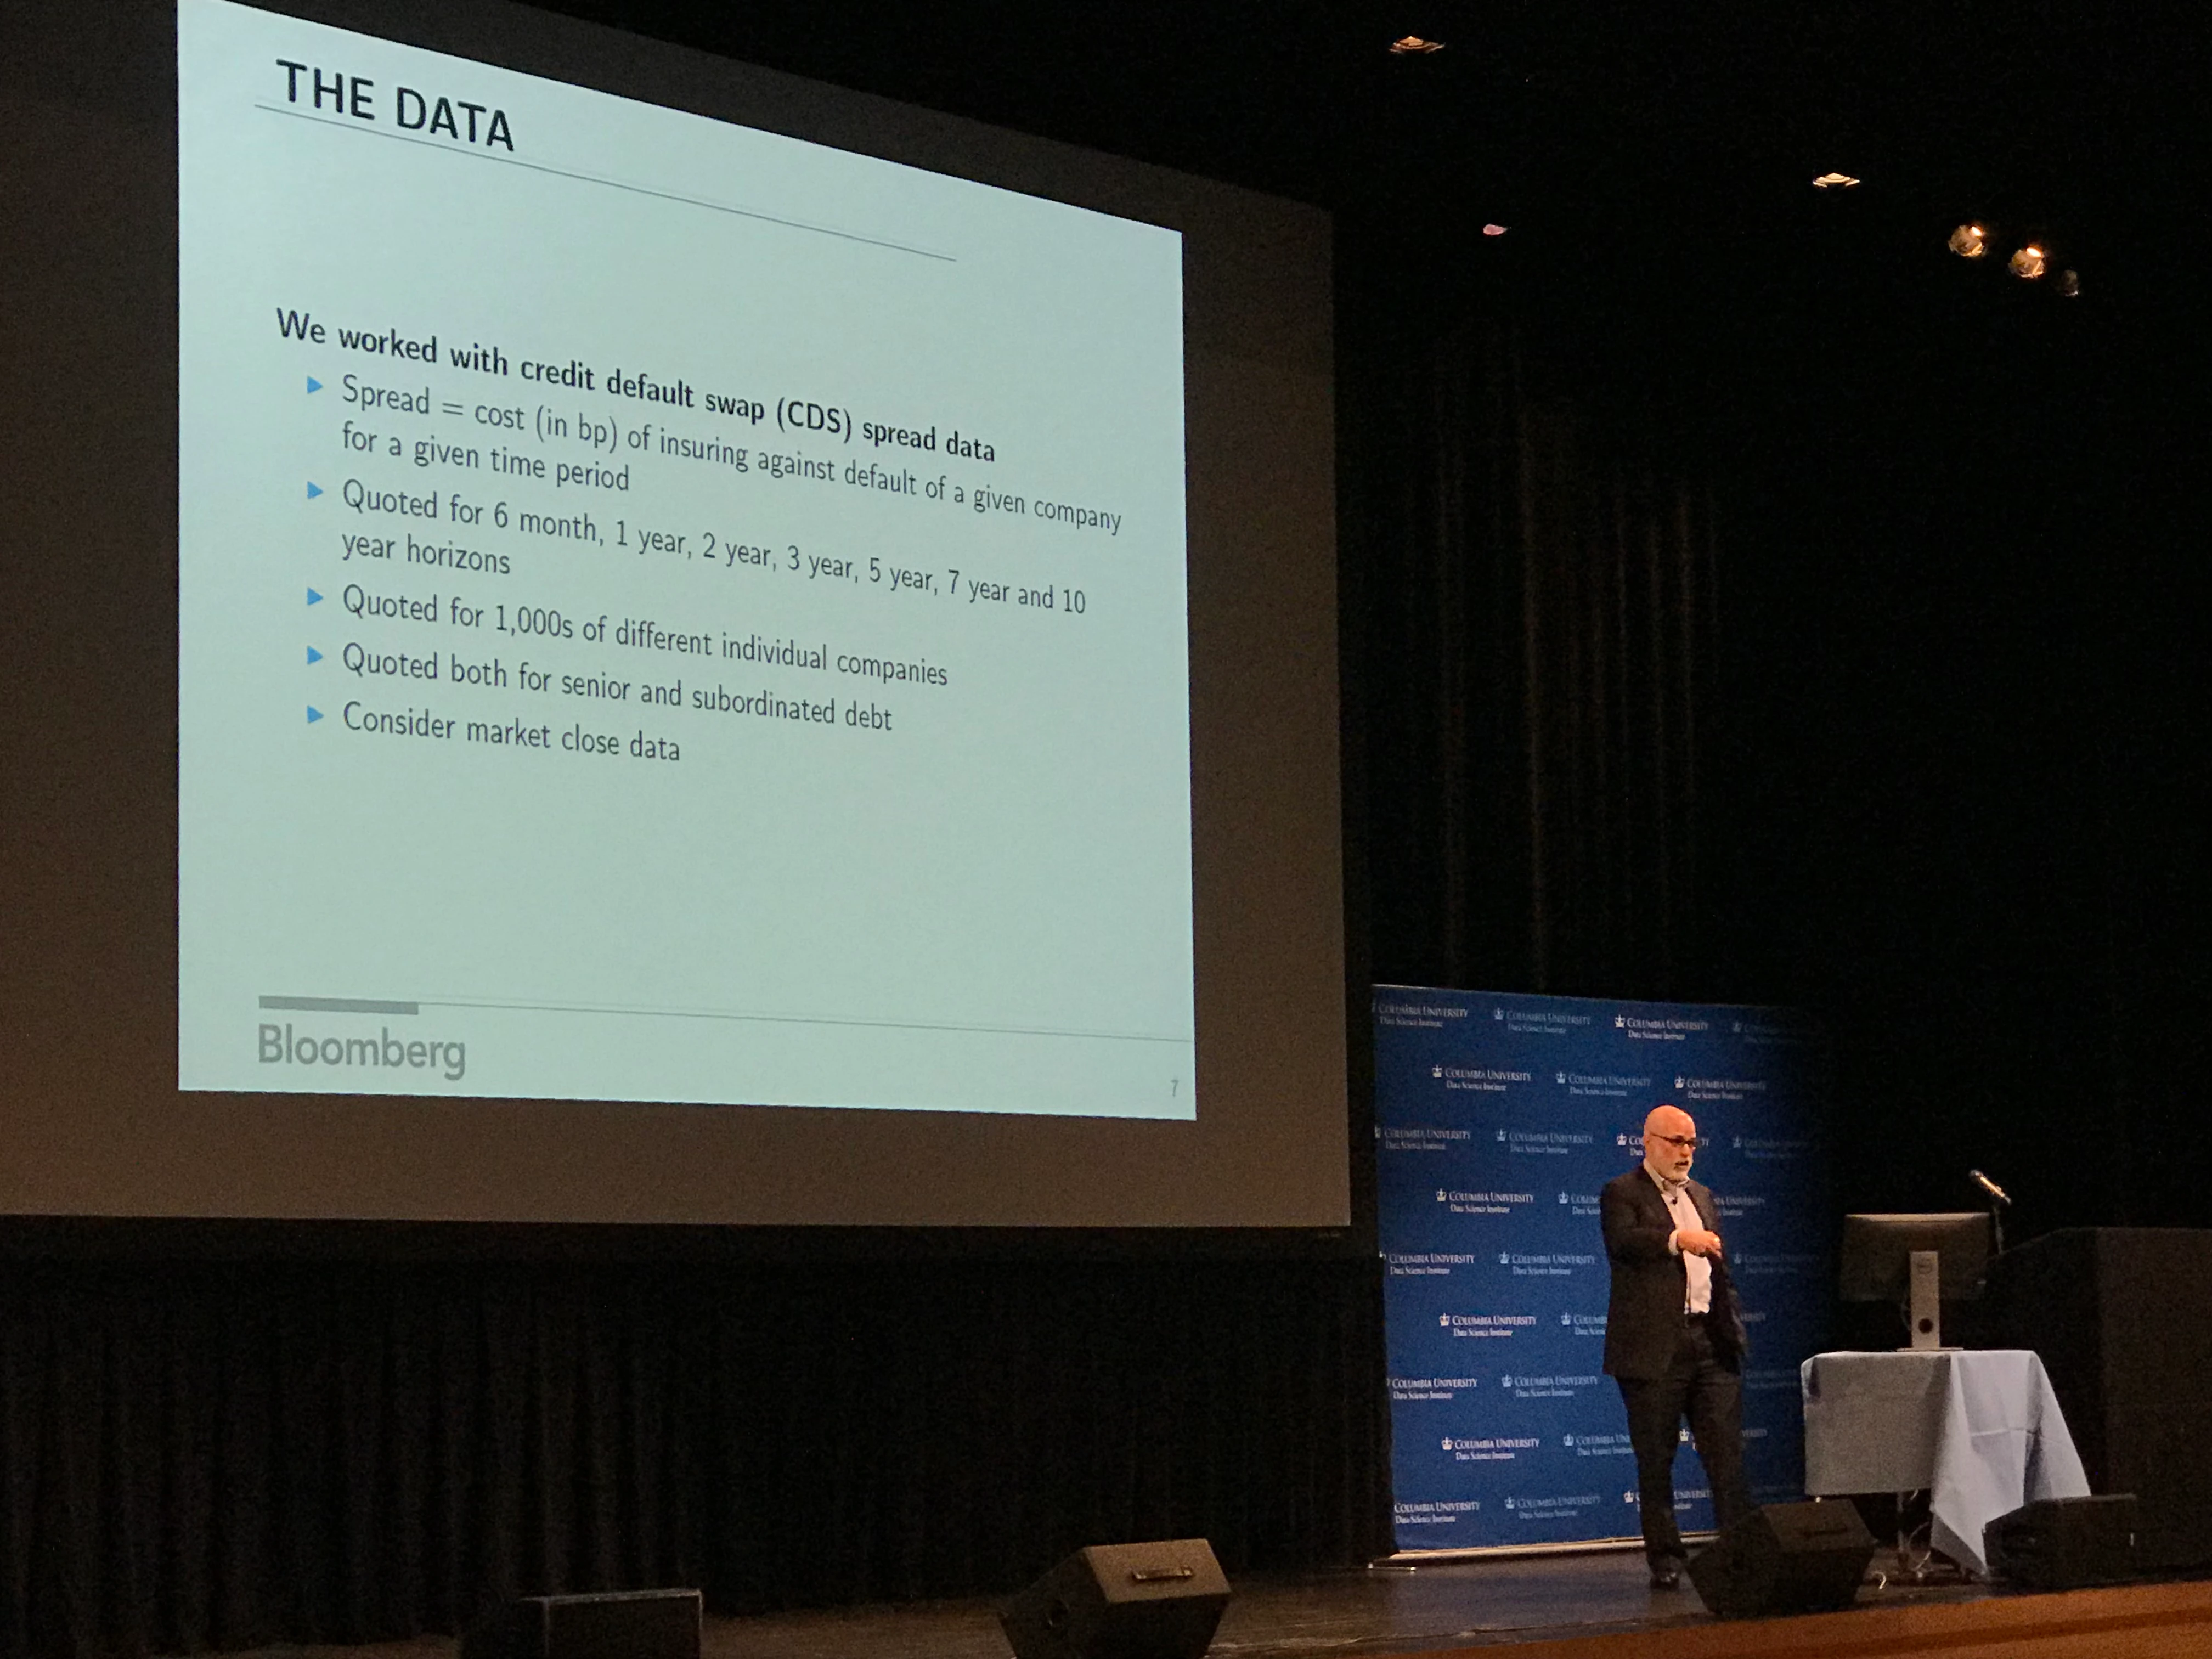 Harvey Stein presents a slide titled "The Data" and discusses how Bloomberg worked with credit default swap spread data.